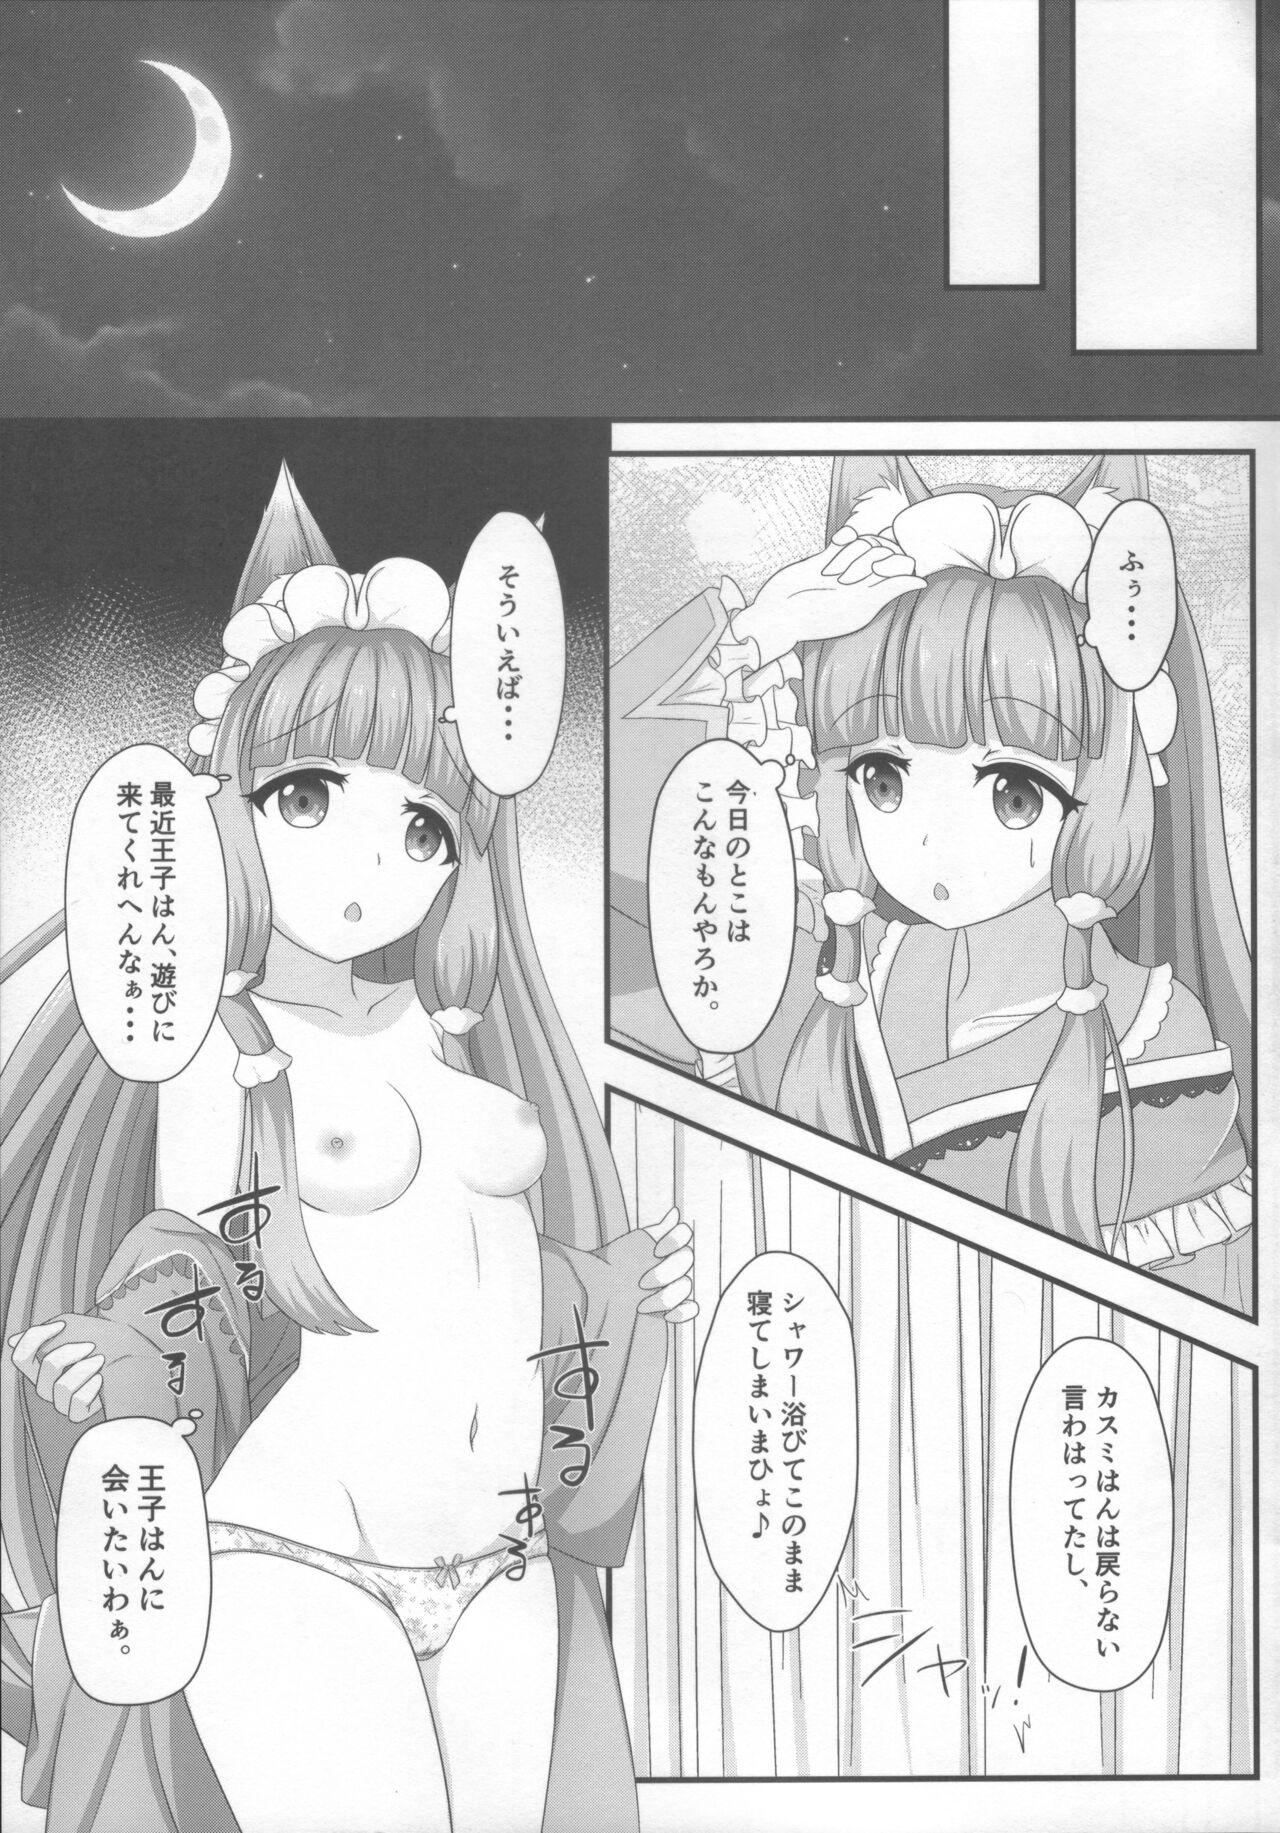 Fellatio Maho Hime Connect! - Princess connect Gay Outdoors - Page 6